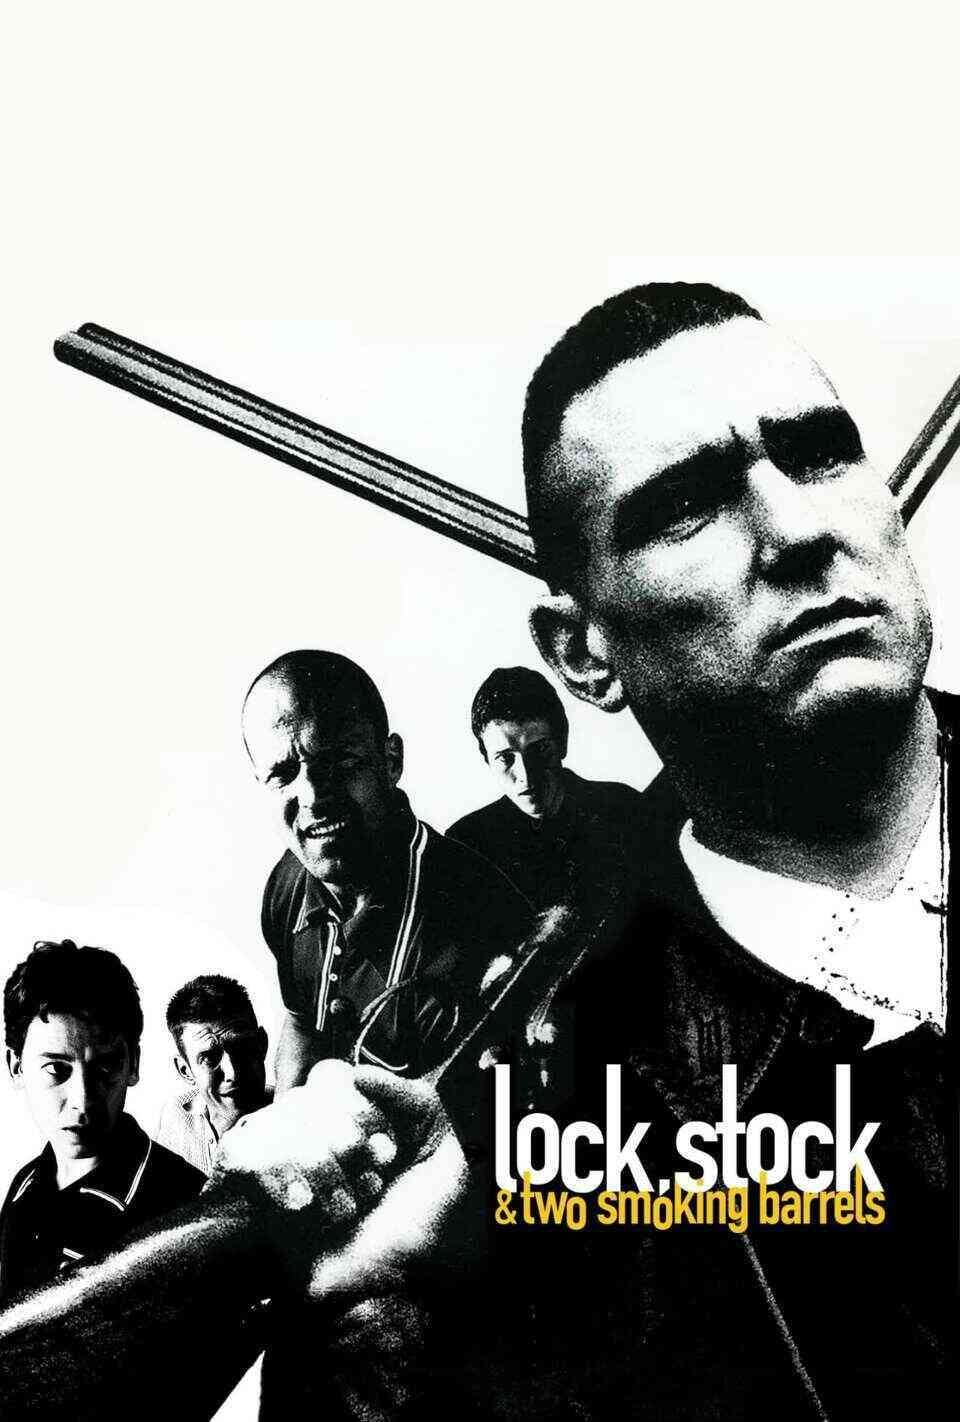 Read Lock, Stock and Two Smoking Barrels screenplay (poster)